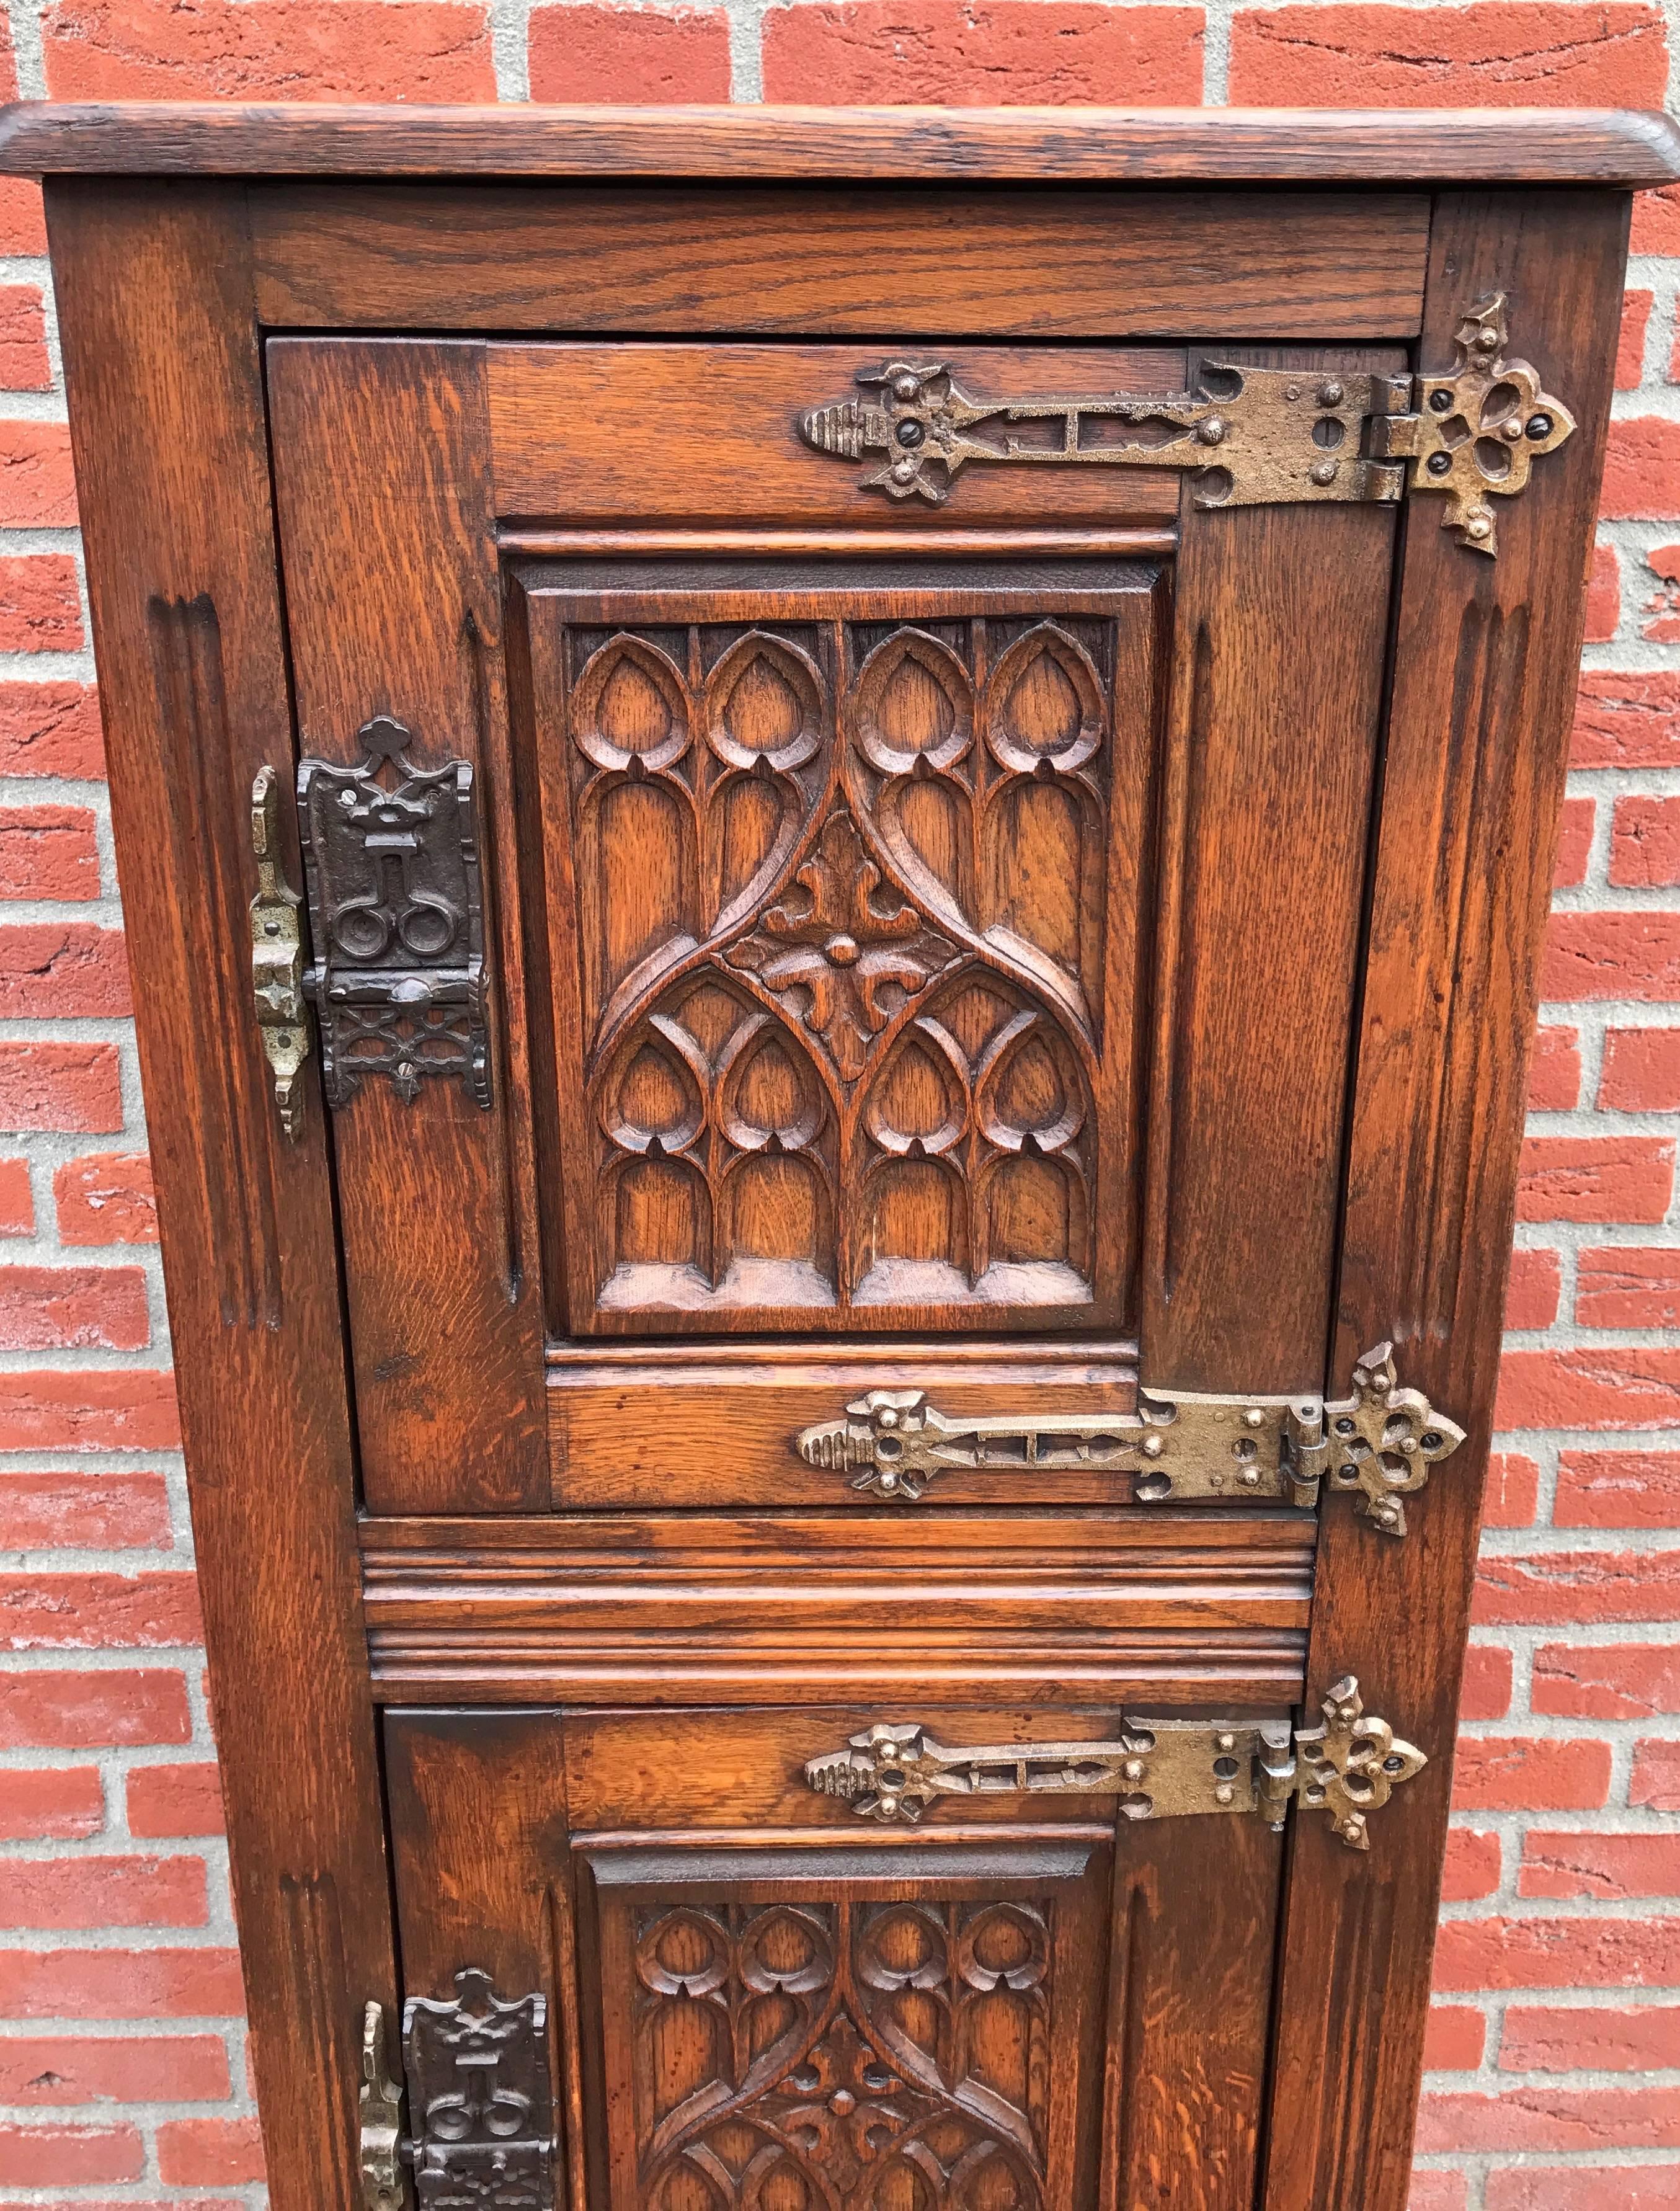 Wonderful craftsmanship and highly practical, Gothic Revival cabinet.

This double door Gothic style cabinet is as stable as the day it was made and apart from some minor imperfections it is in excellent condition as well. Thanks to its practical